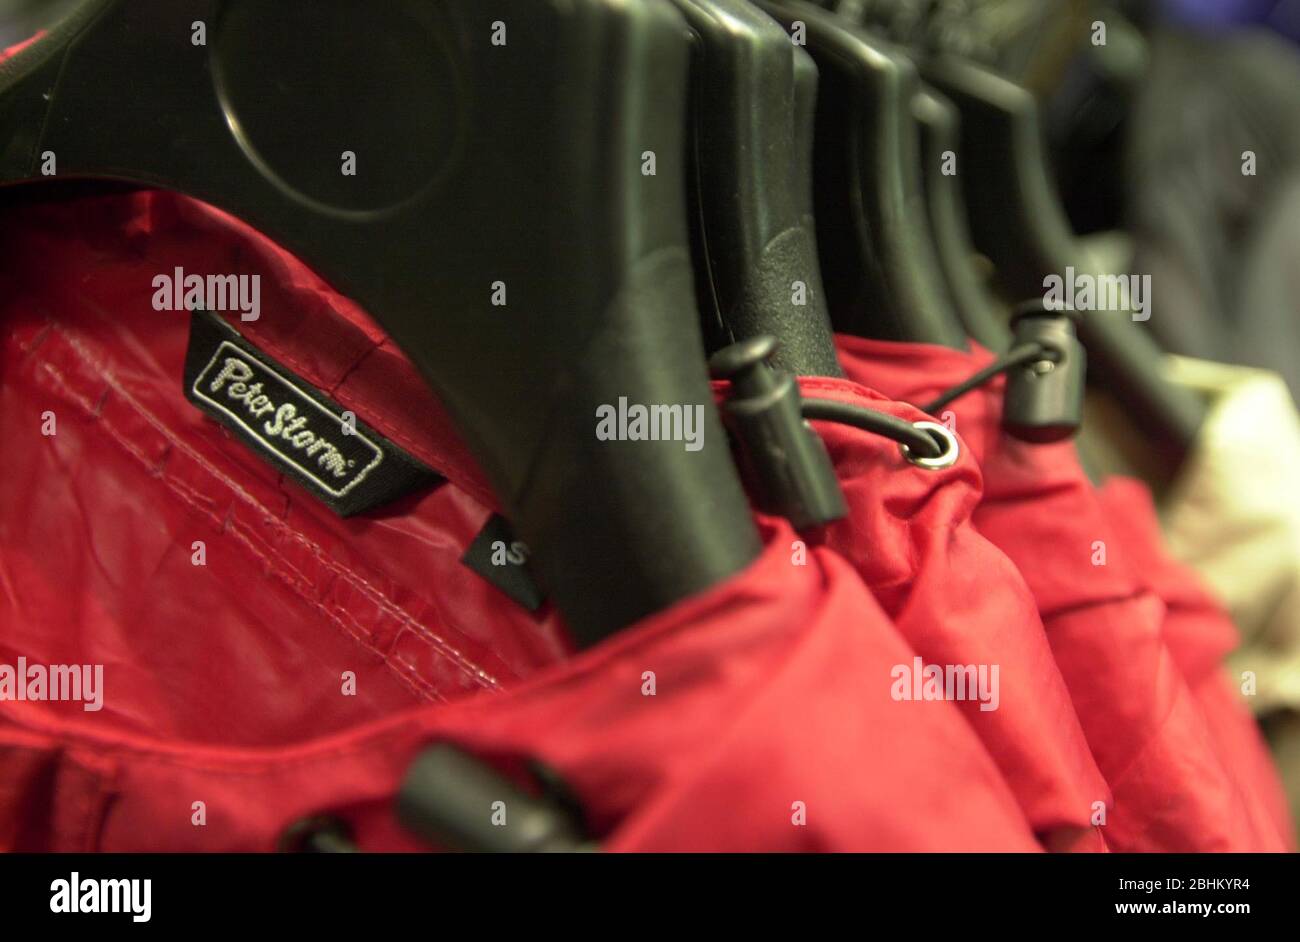 A rail of Peter Storm jackets in a Blacks store. Stock Photo